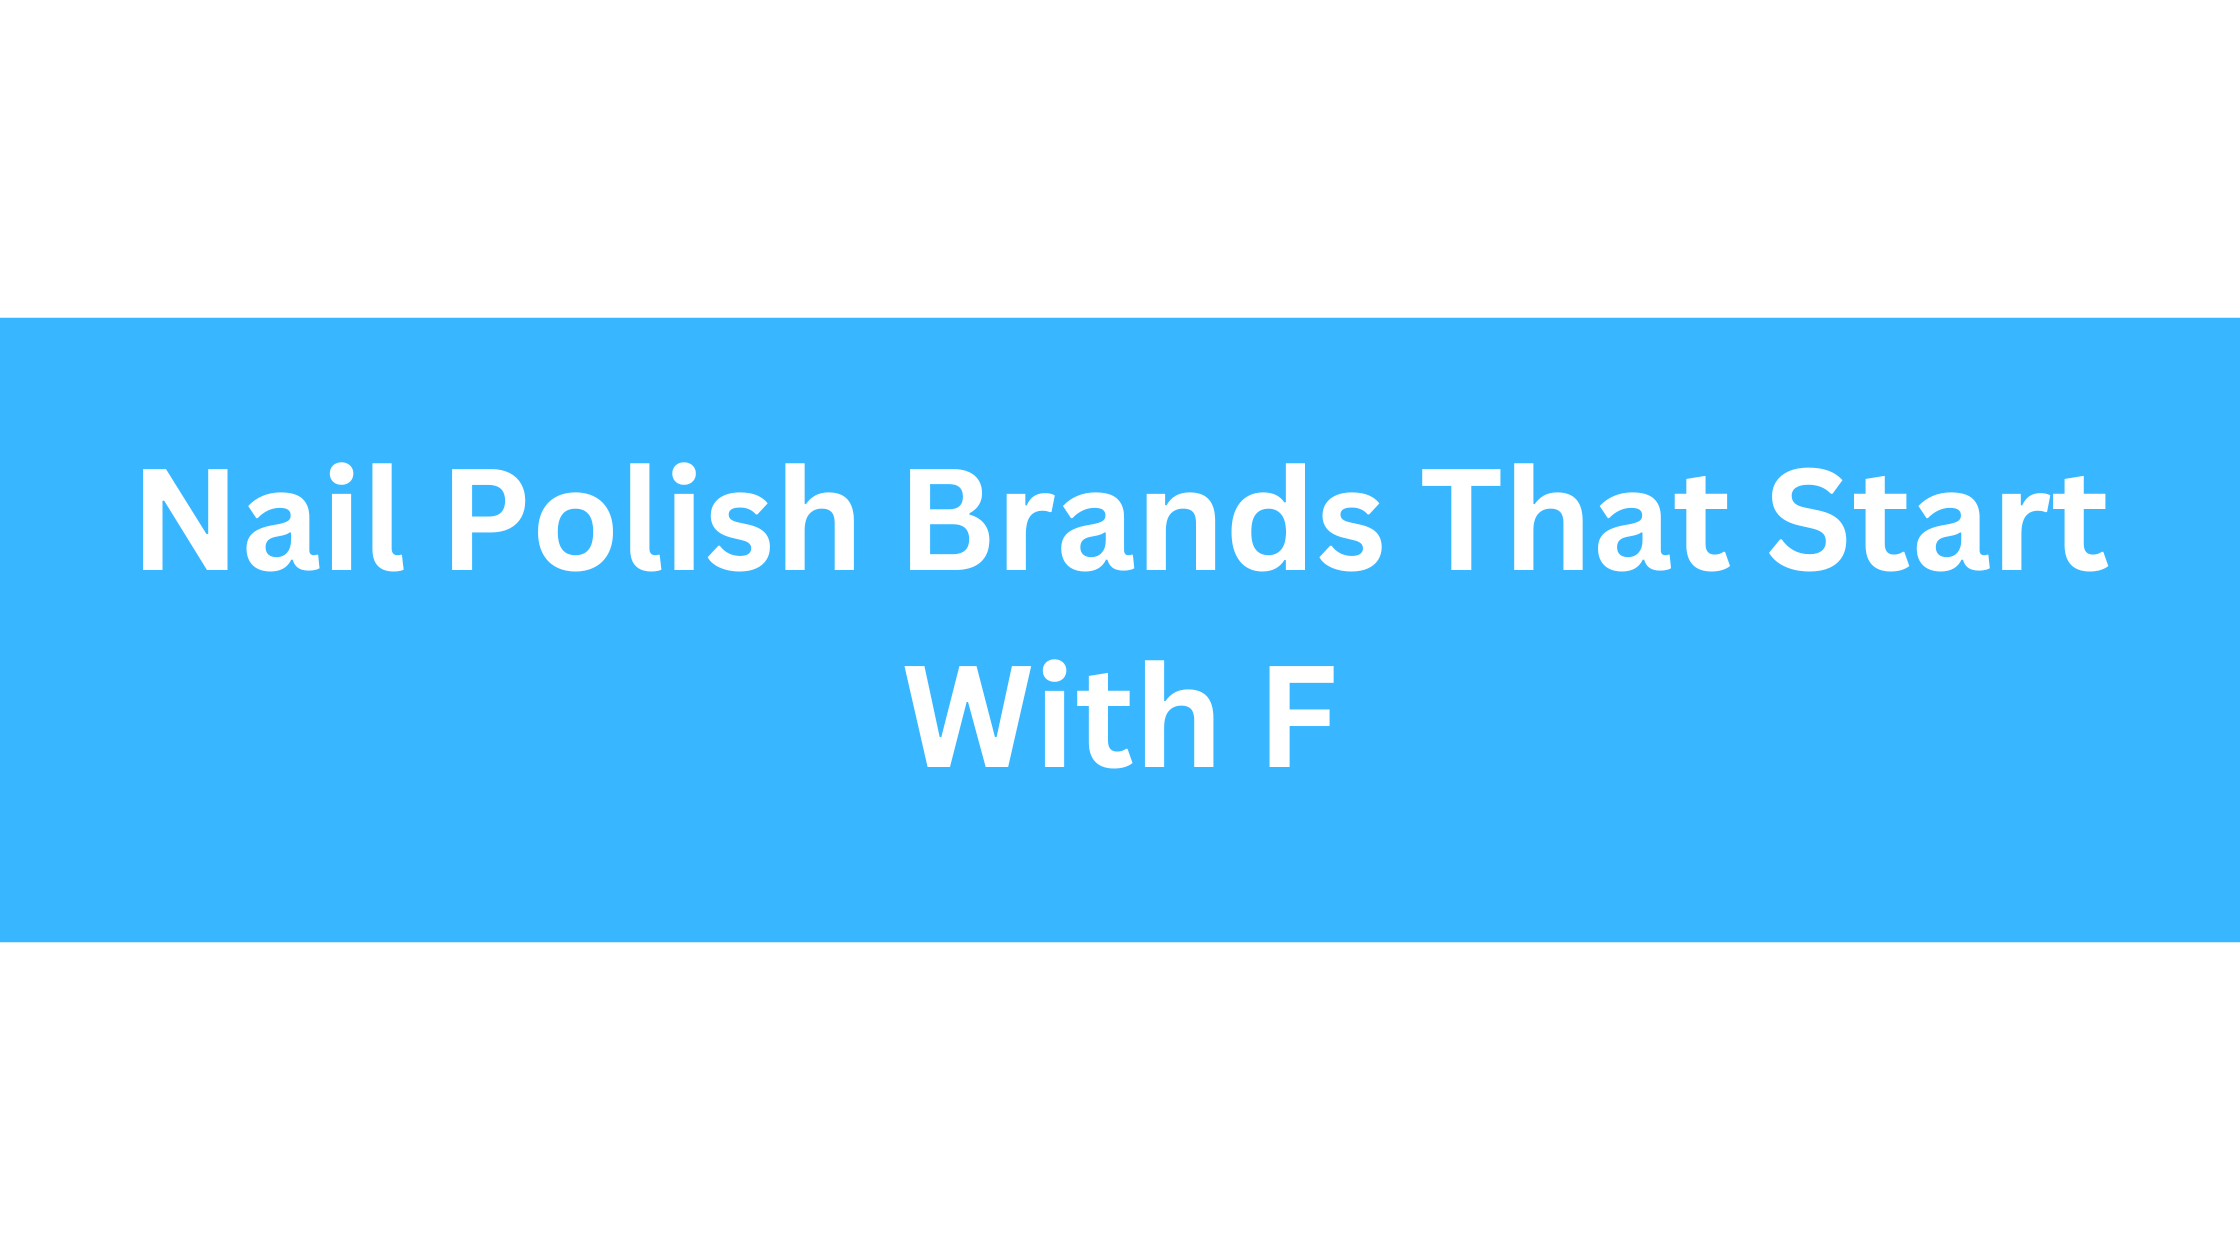 Nail Polish Brands That Start With F